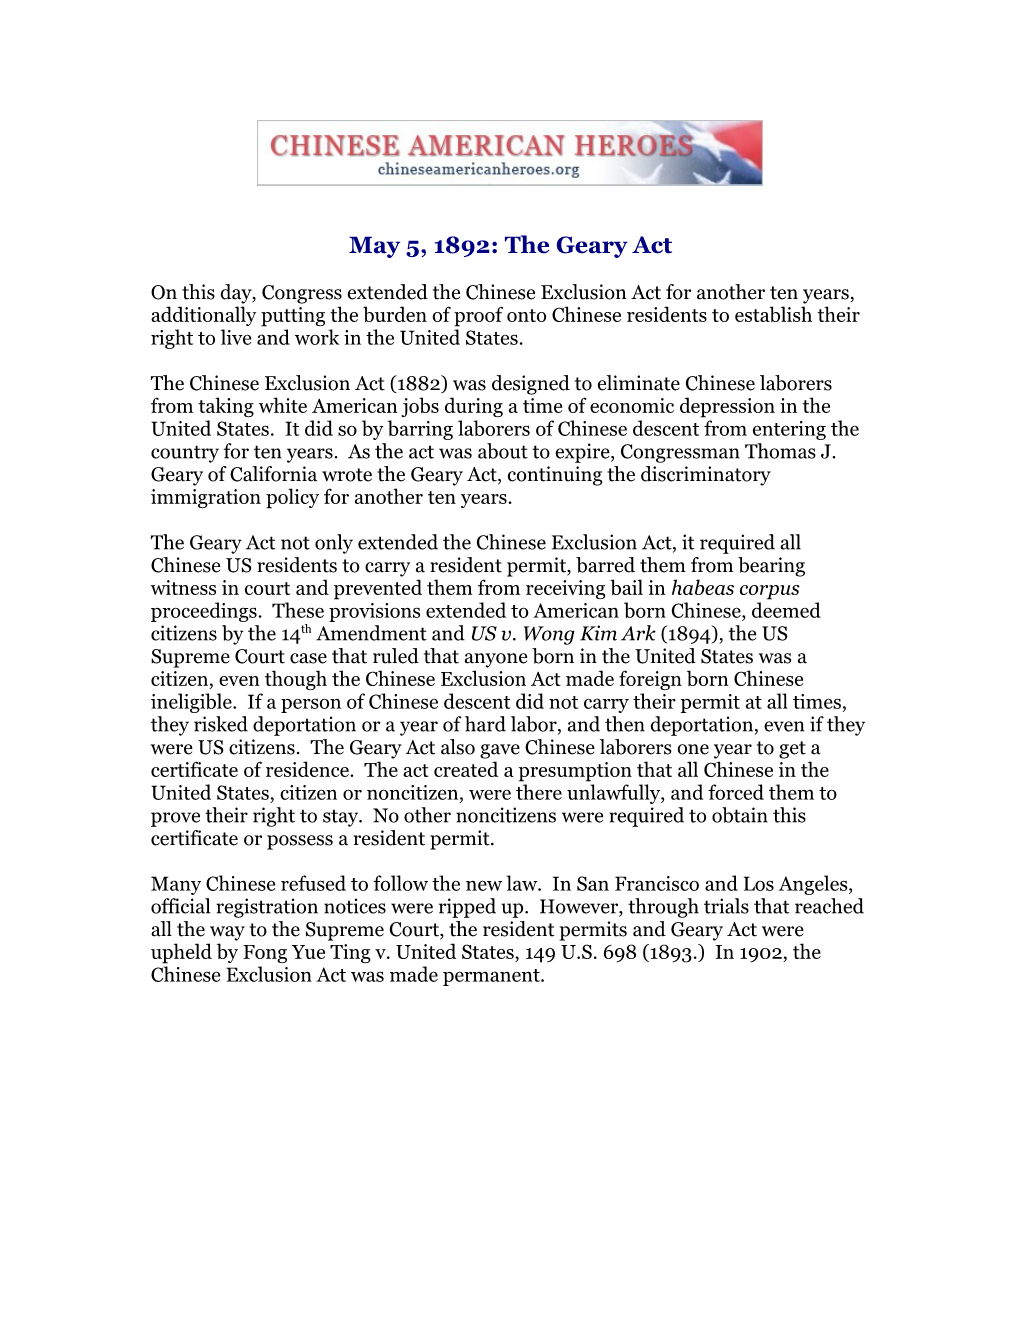 May 5, 1892: the Geary Act